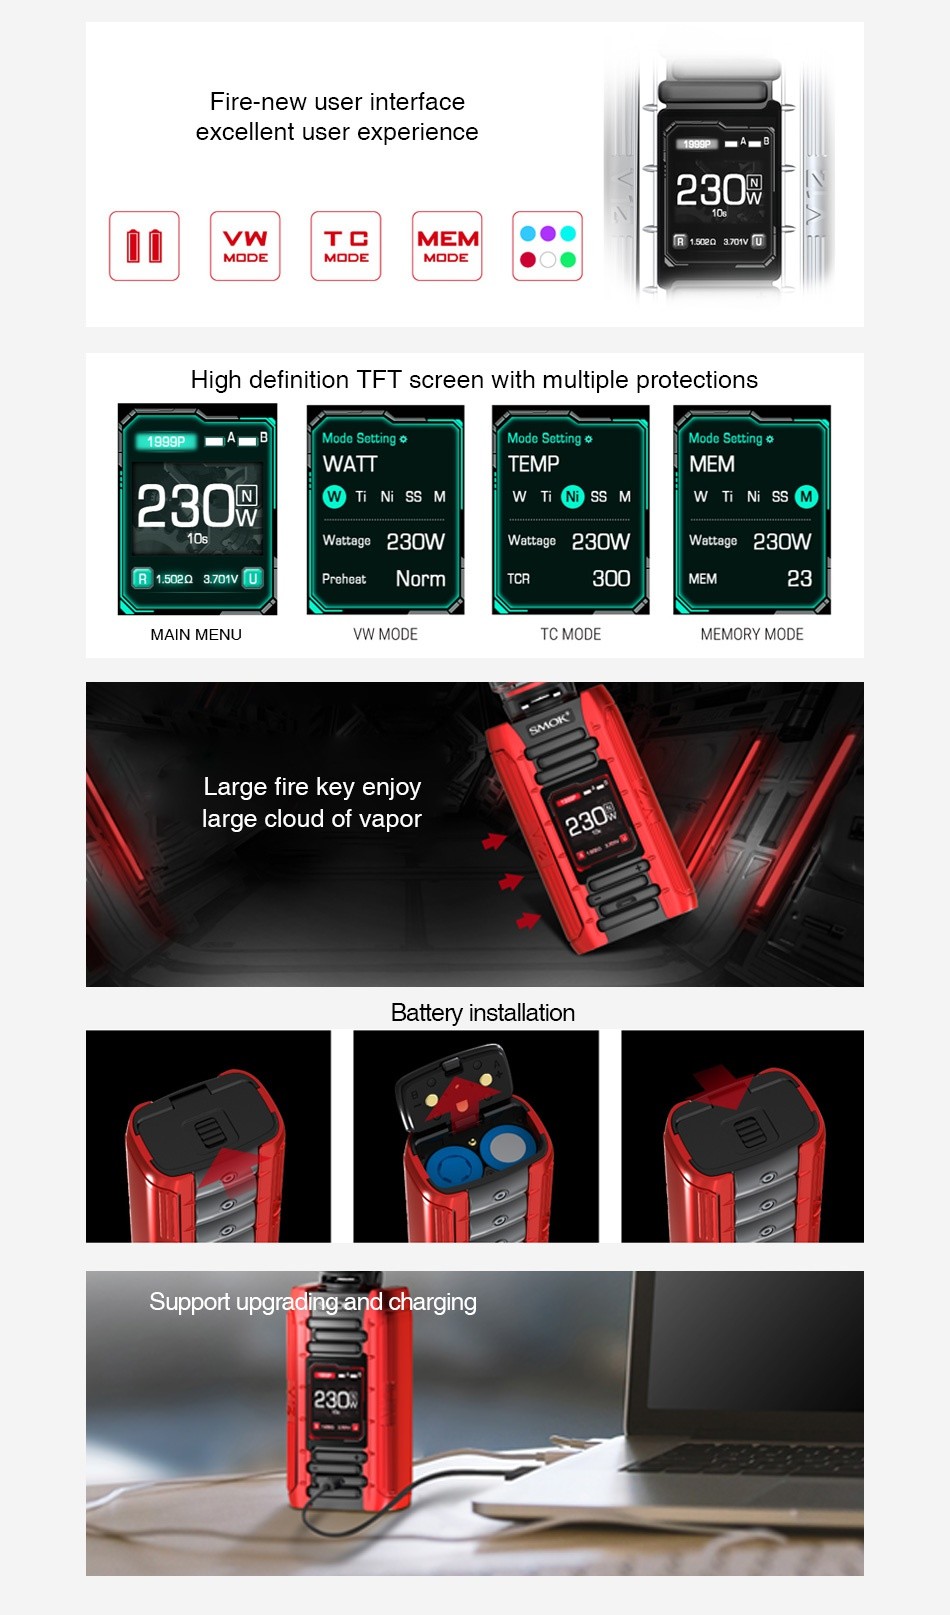 SMOK E-Priv 230W TC Box MOD Fire new user interface excellent user experience 230 VW TMEM    MODE High definition TFT screen with multiple protections Mode Setting o Mode Setting o Mode Setting o WATT TEMP MEM 30 nM W Ti Ni SS M W Ti Ni SSM Wattage 230W attage 230W Wattage 230W 1 50203701V Preheat Norm 300 MEM 23 MAIN MENU VW MODE TC MODE MEMORY MODE Large fire key enjoy large cloud of vapor 2 Battery installation Support upgrading and charging 230N